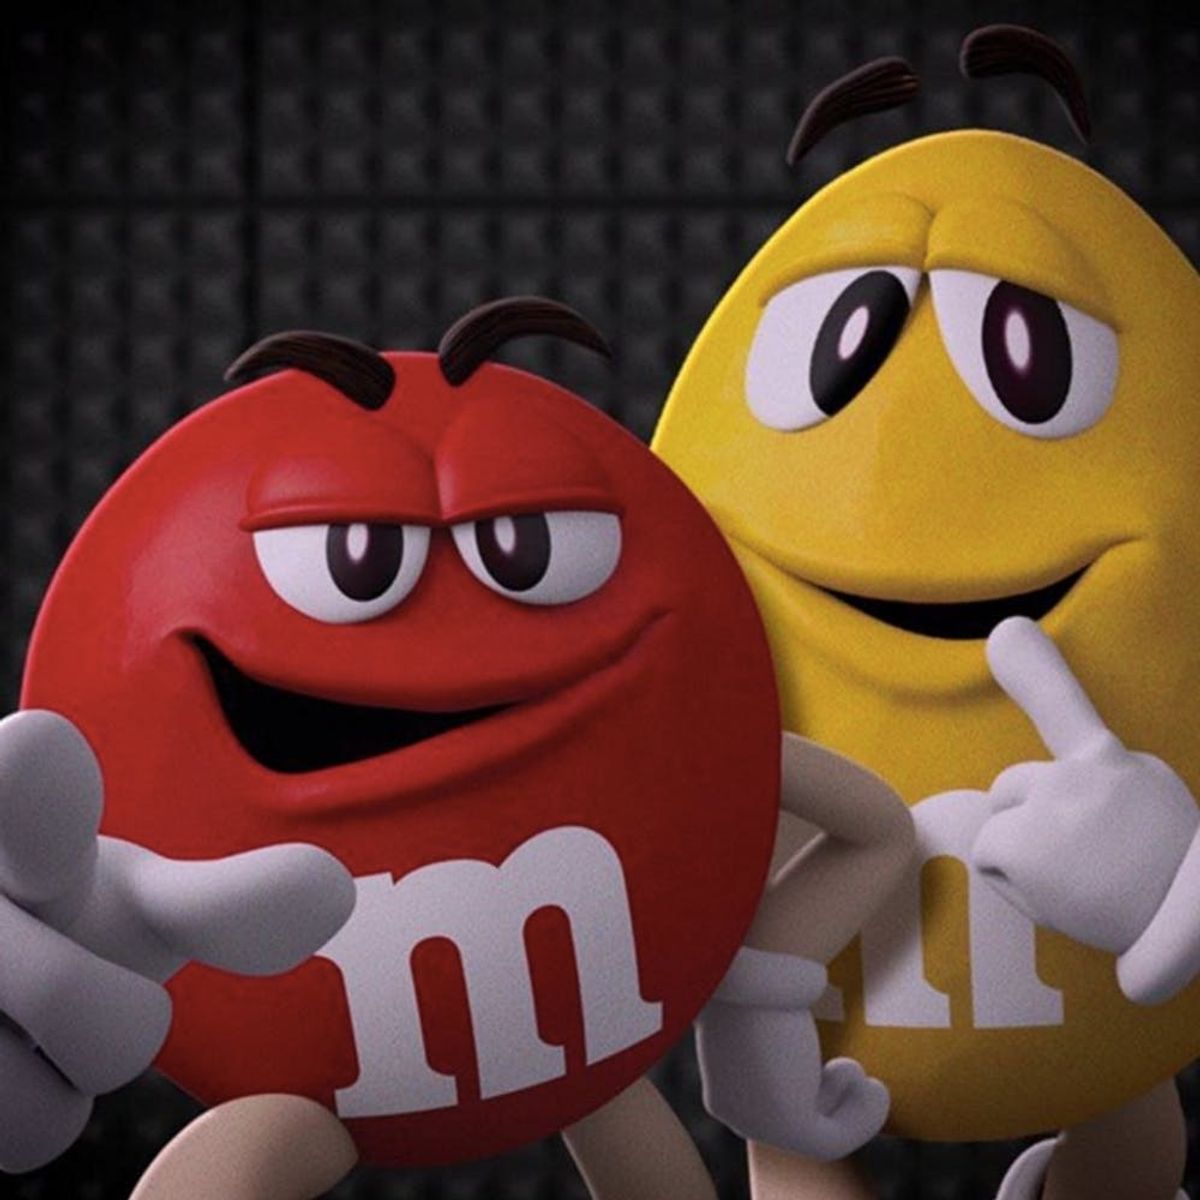 Life Is Beautiful and M&M’s Is Dropping 3 New Peanut Flavors